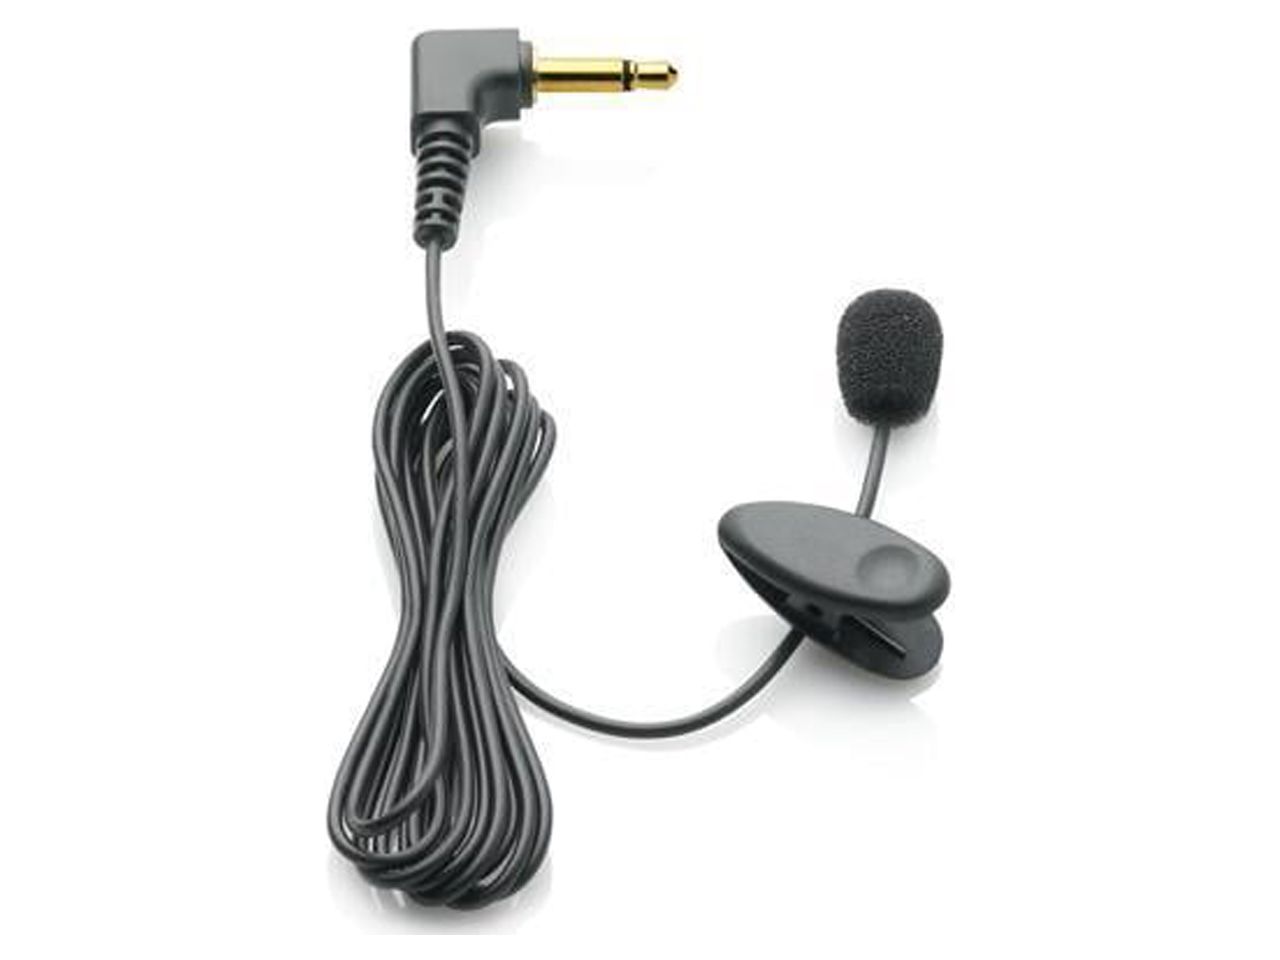 PHILIPS LFH9173/00 Black 3.5mm Connector Speech Tie/Collar Clip Microphone - image 2 of 2